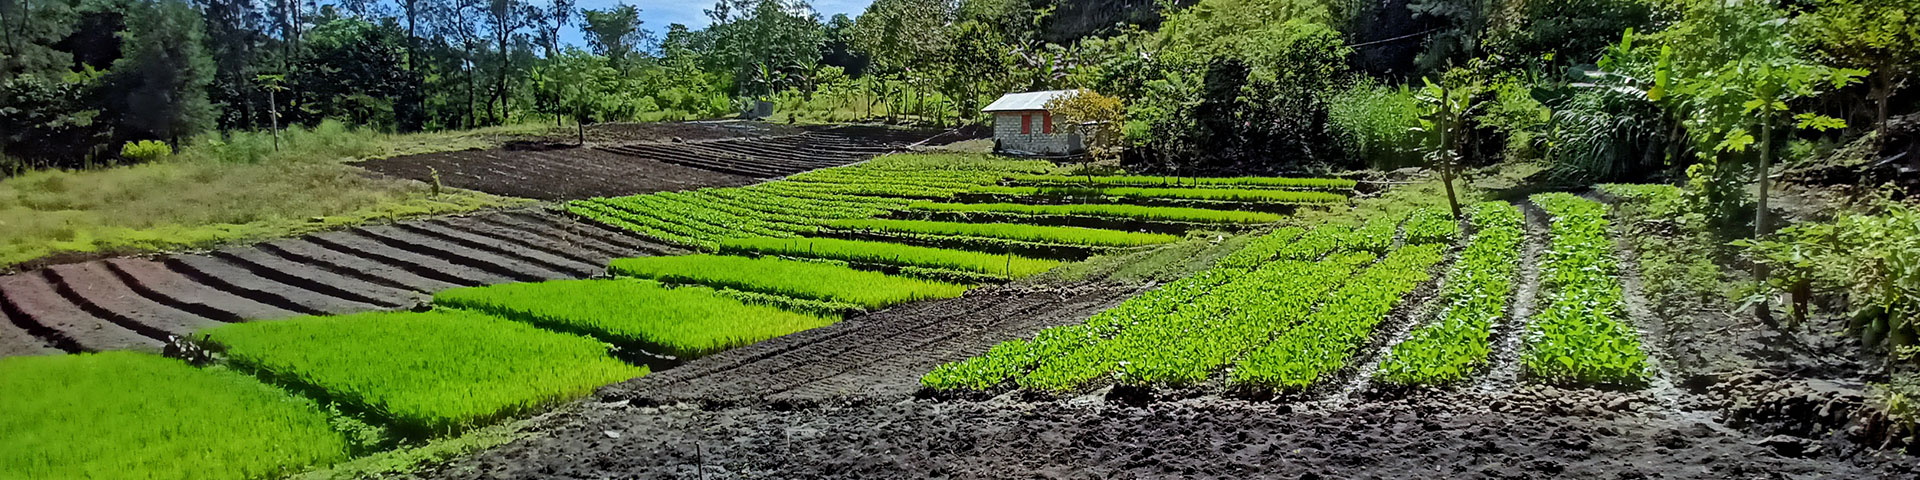 A plantation area owned by a farmers’ group in South Central Timor Regency, East Nusa Tenggara.